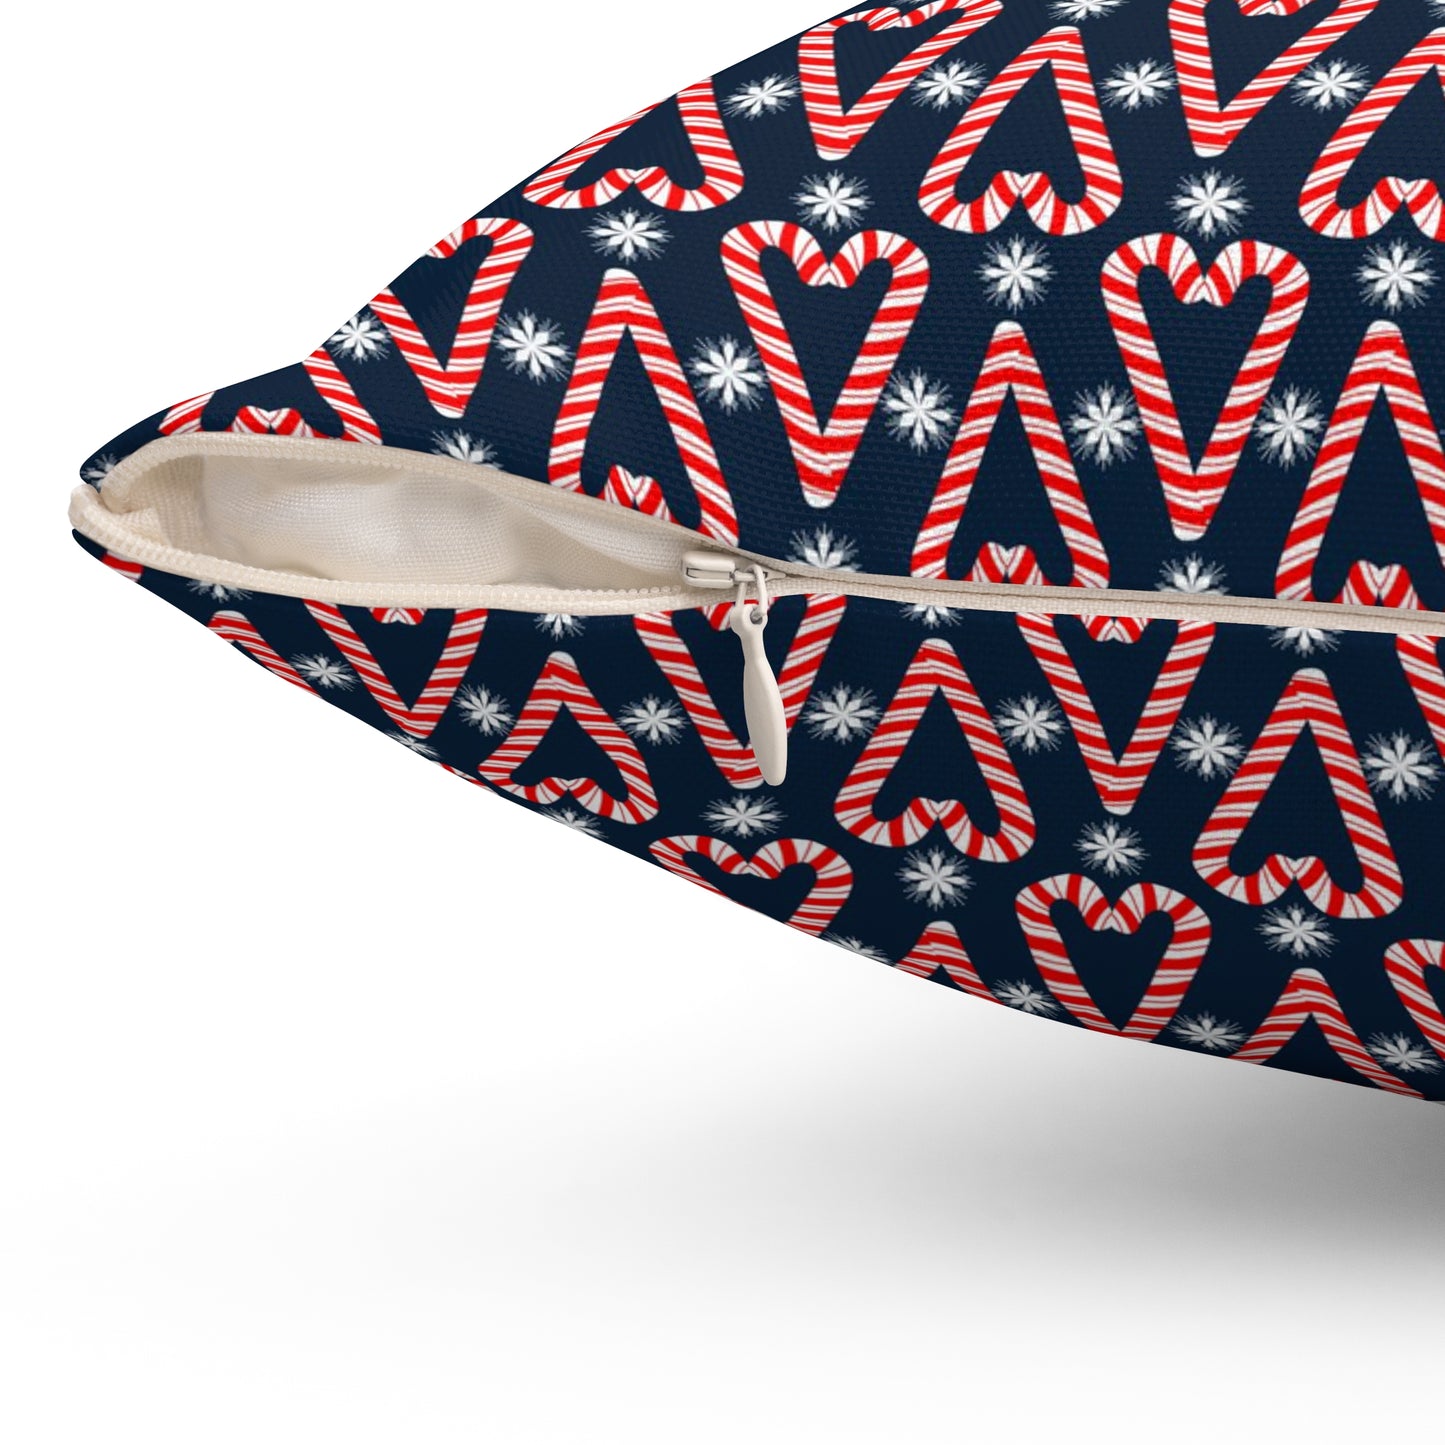 Candy Cane Hearts Spun Polyester Square Pillow